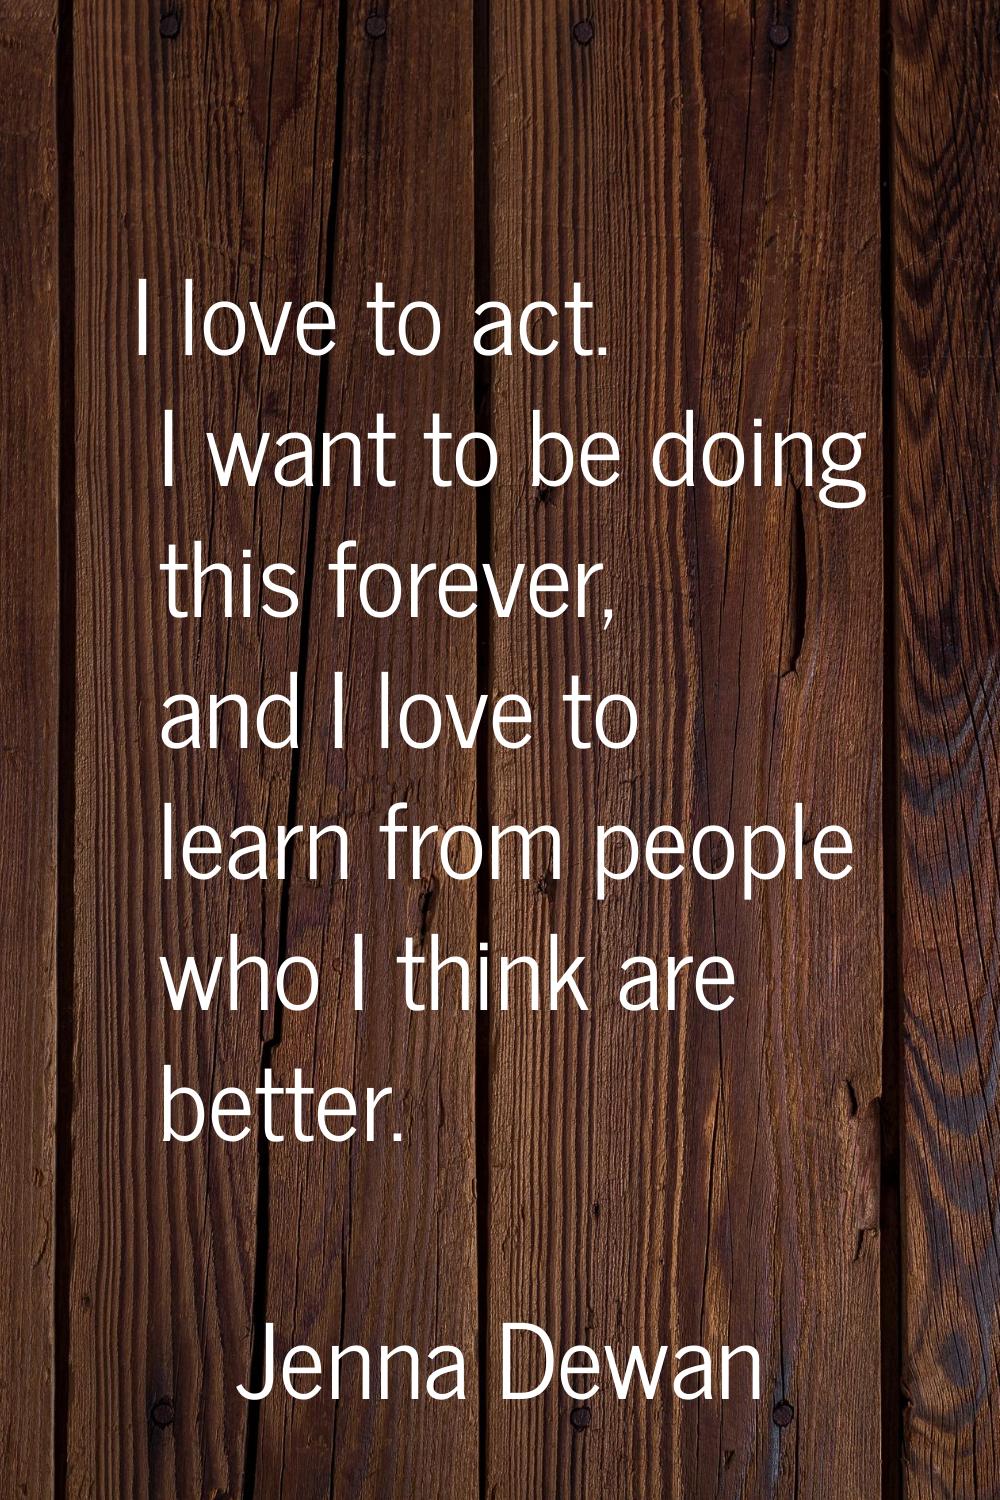 I love to act. I want to be doing this forever, and I love to learn from people who I think are bet